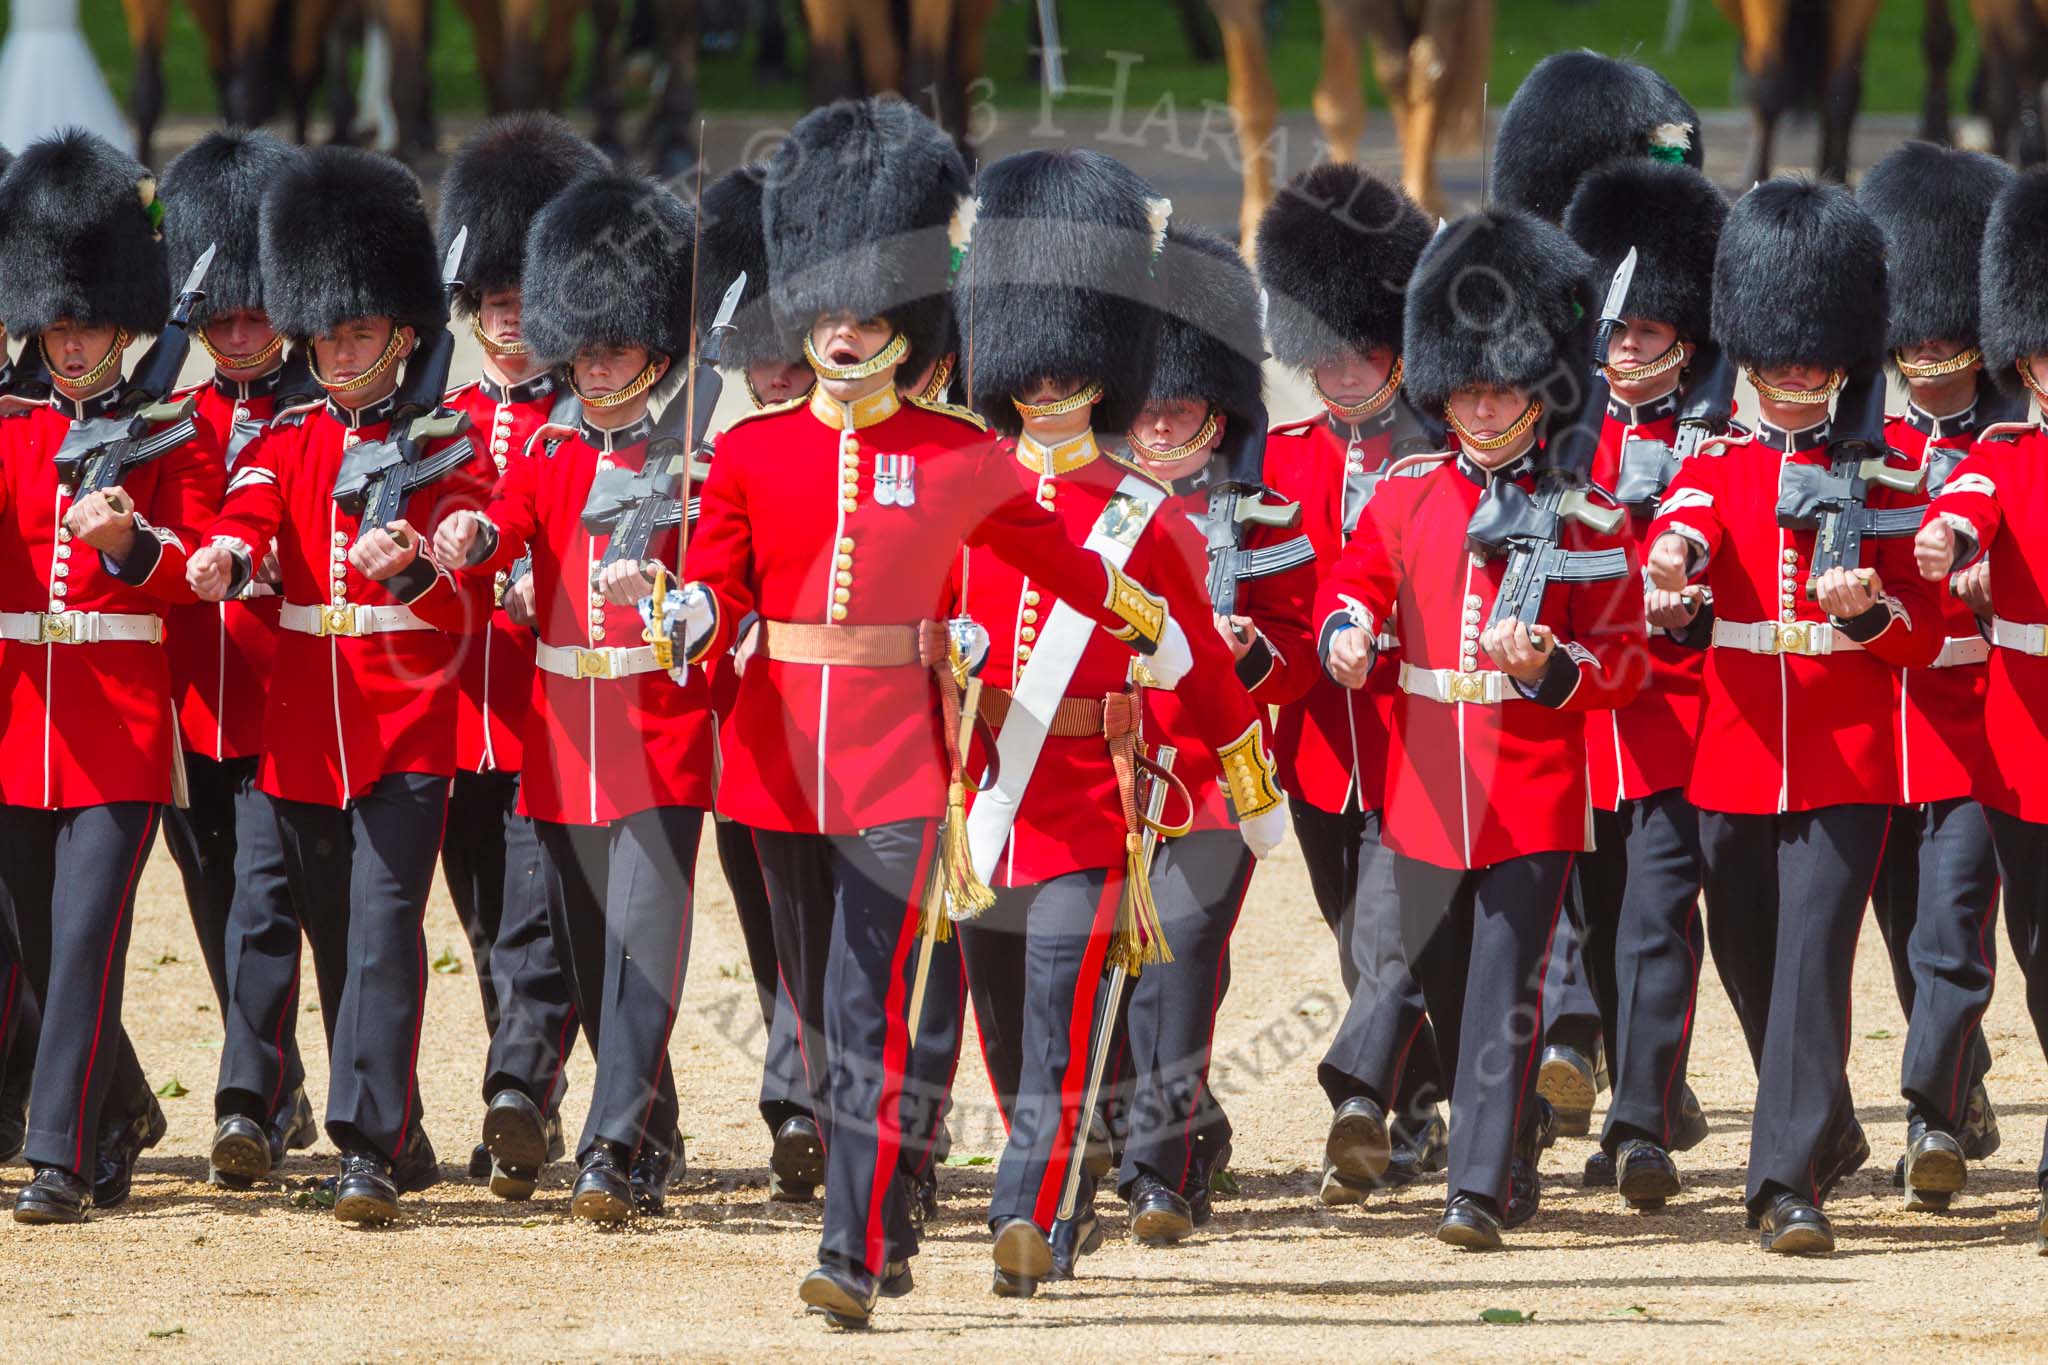 The Colonel's Review 2015.
Horse Guards Parade, Westminster,
London,

United Kingdom,
on 06 June 2015 at 11:16, image #290